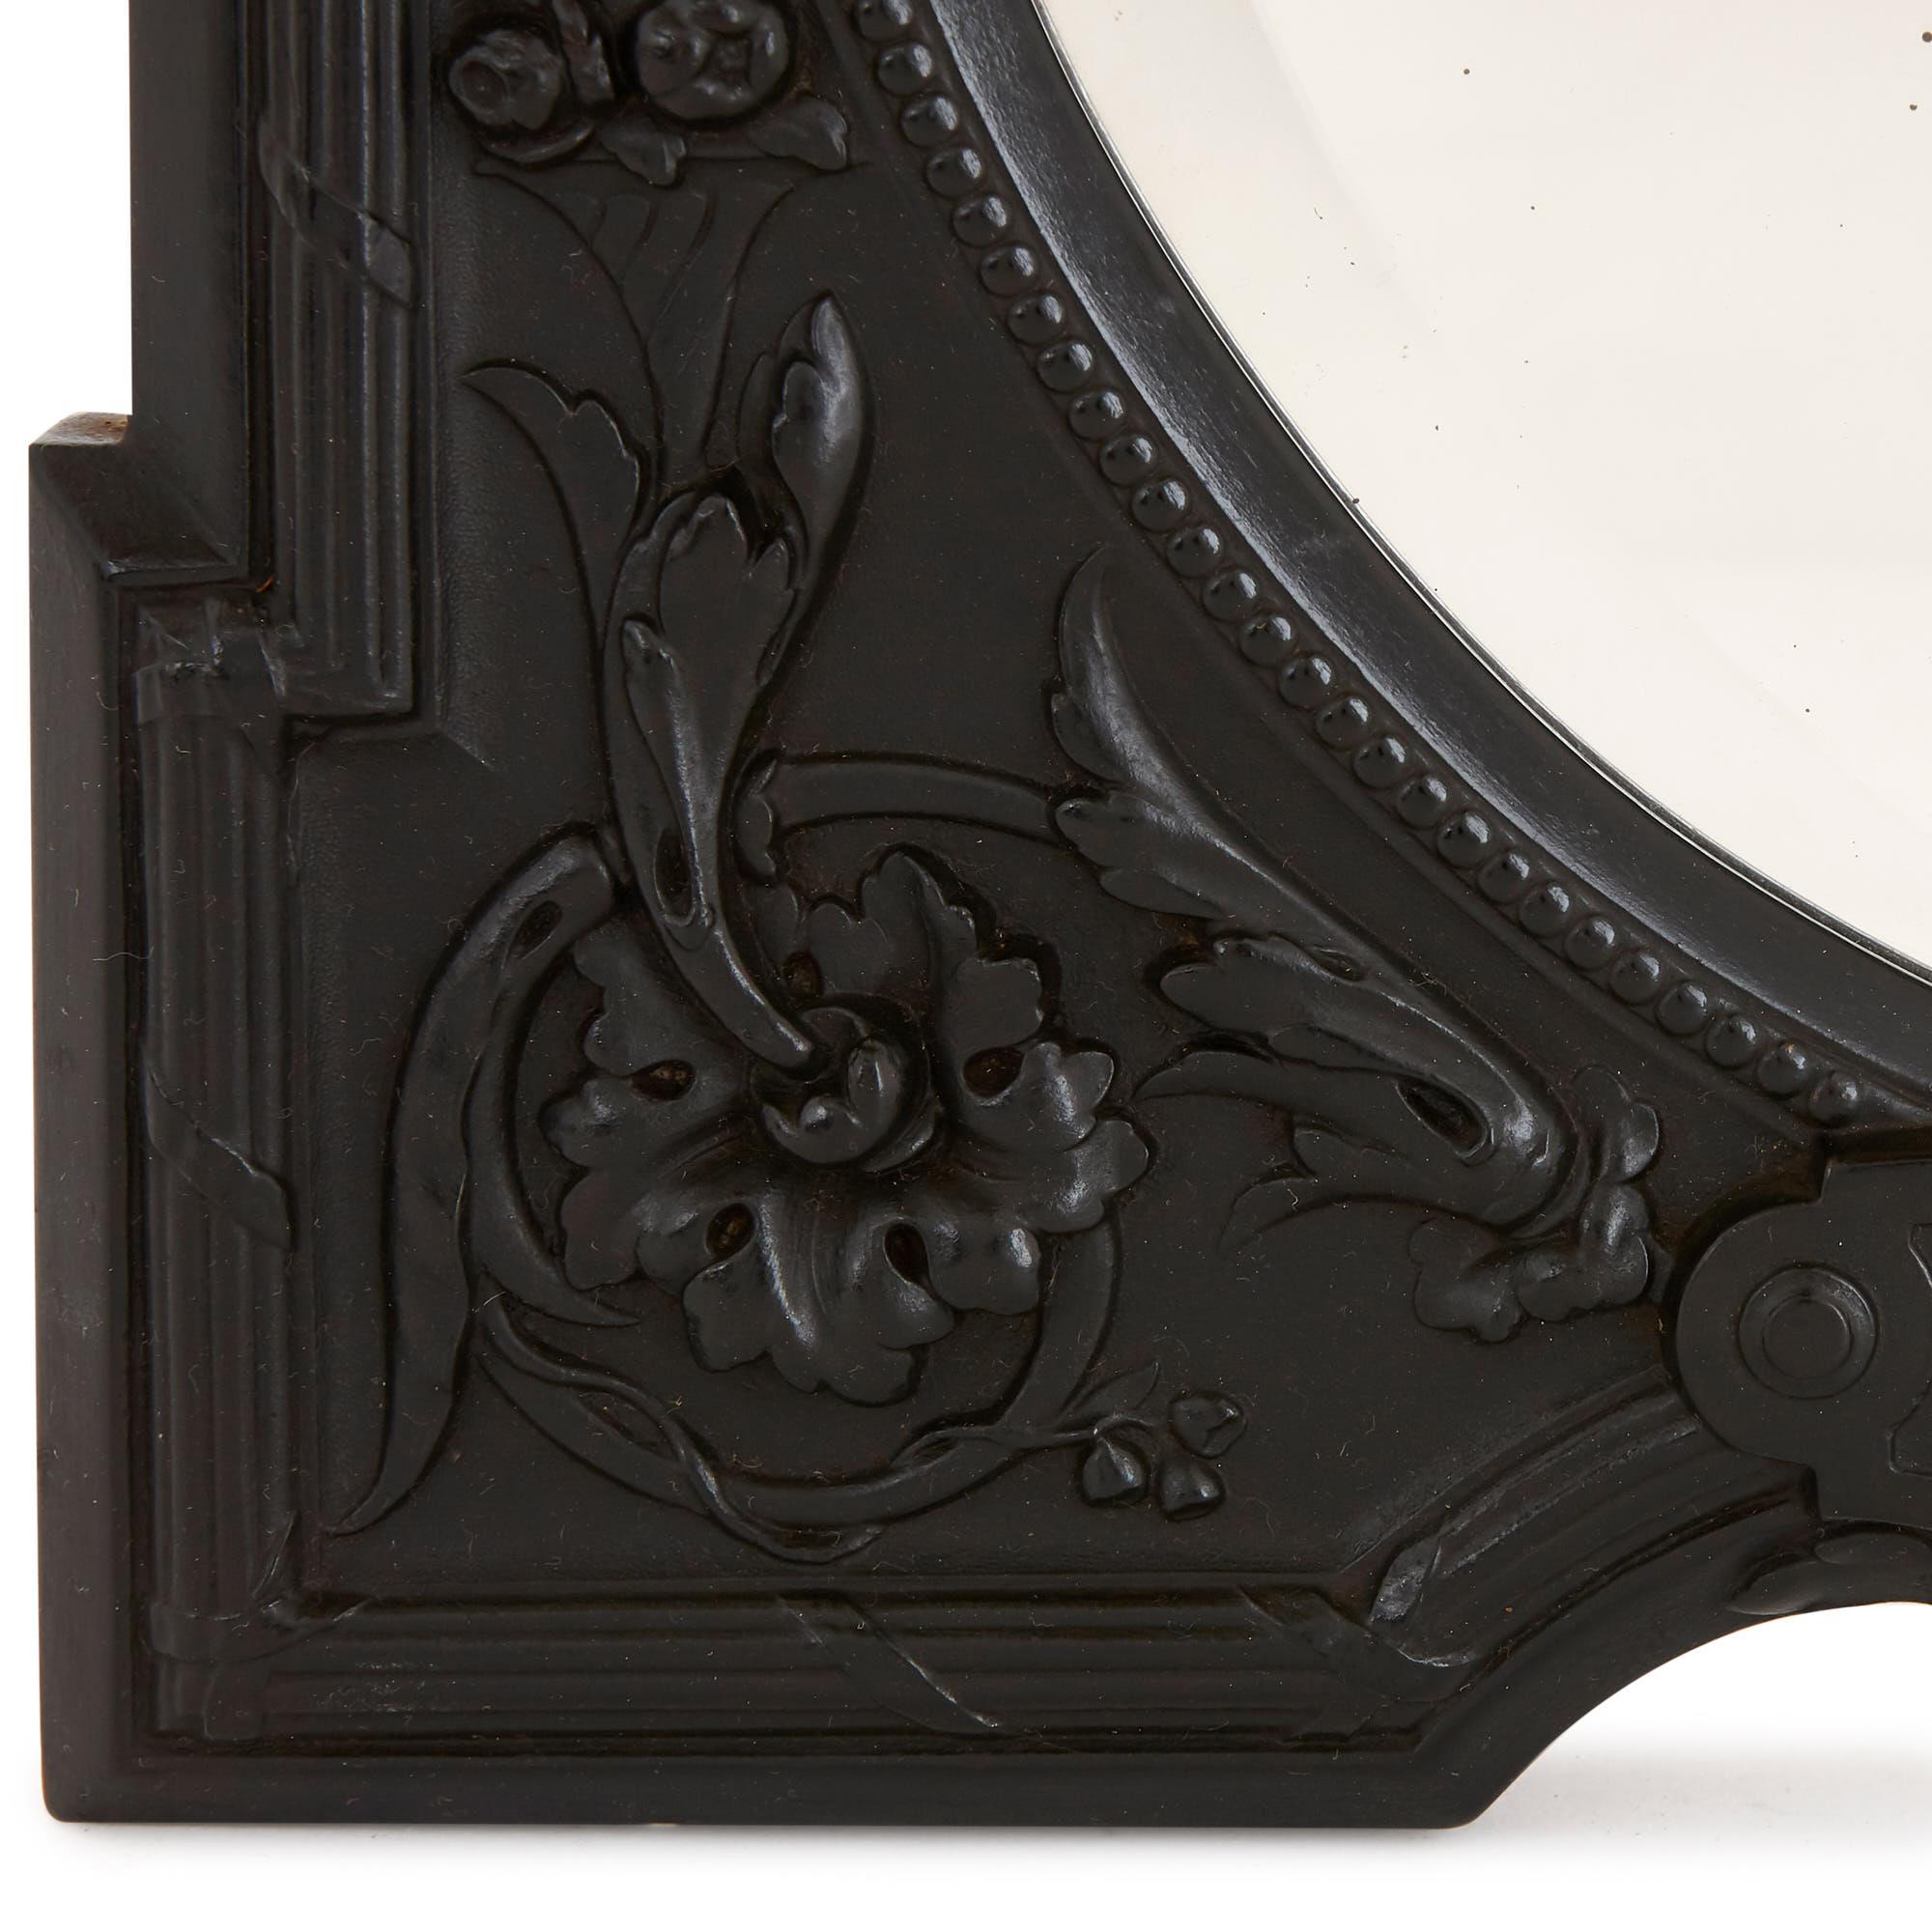 Neoclassical Antique French Ebony Dressing Table Mirror  For Sale